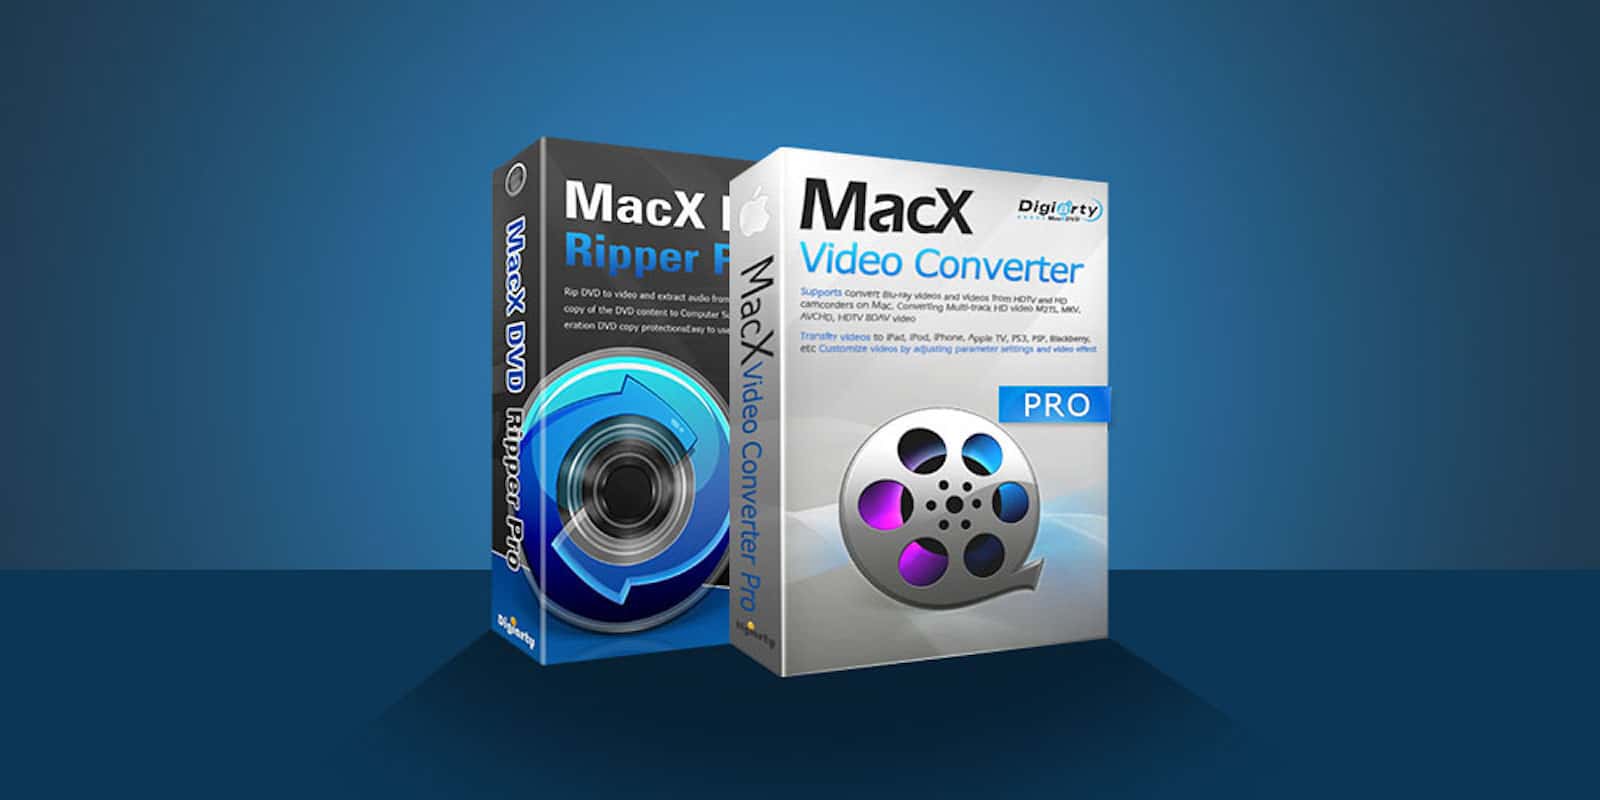 Master your media collection with lifetime access to DVD ripping and video conversion software.